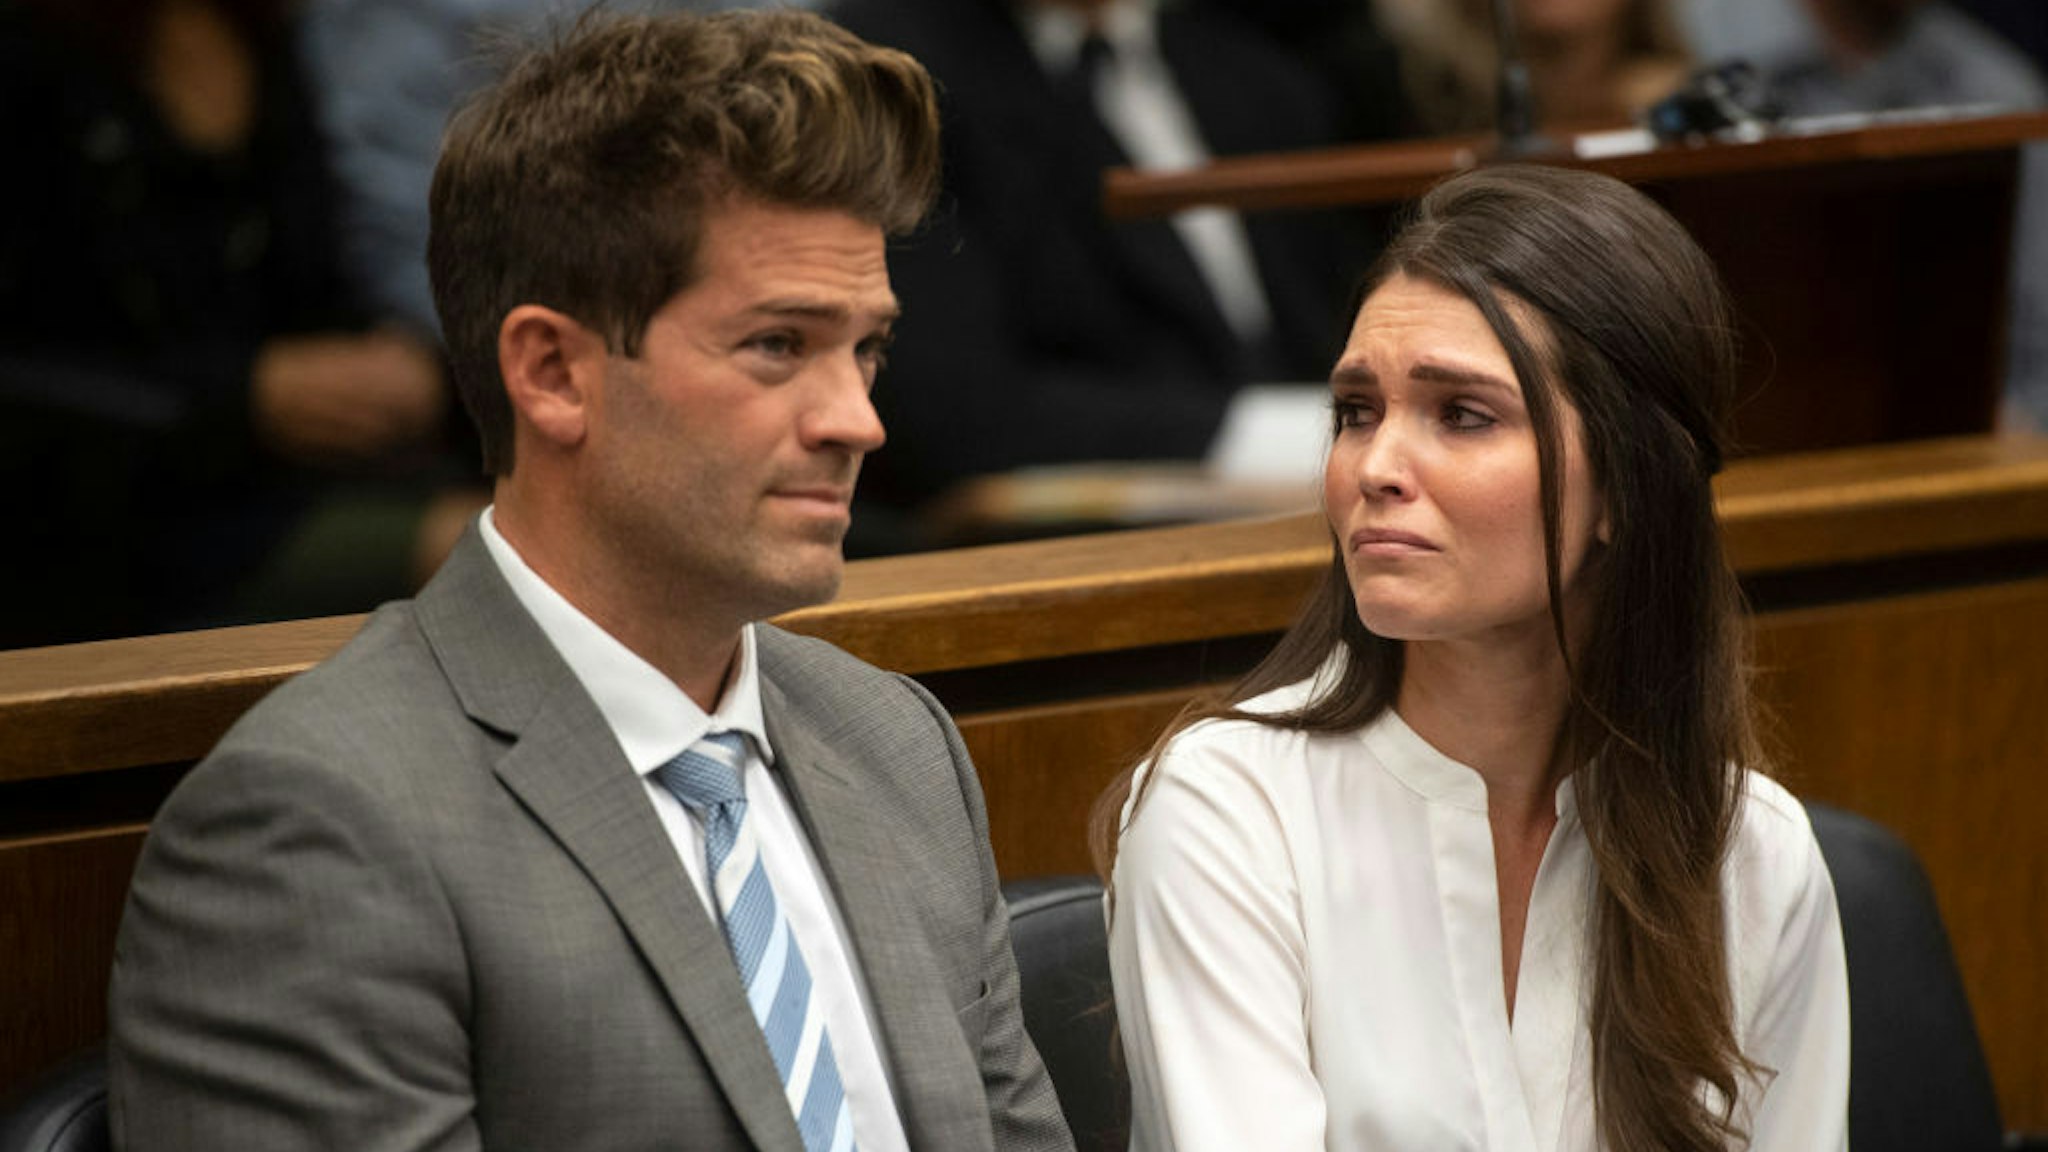 Dr. Grant Robicheaux and his girlfriend Cerissa Riley listen during their arraignment at the Harbor Justice Center in Newport Beach, CA on Wednesday, October 17, 2018.